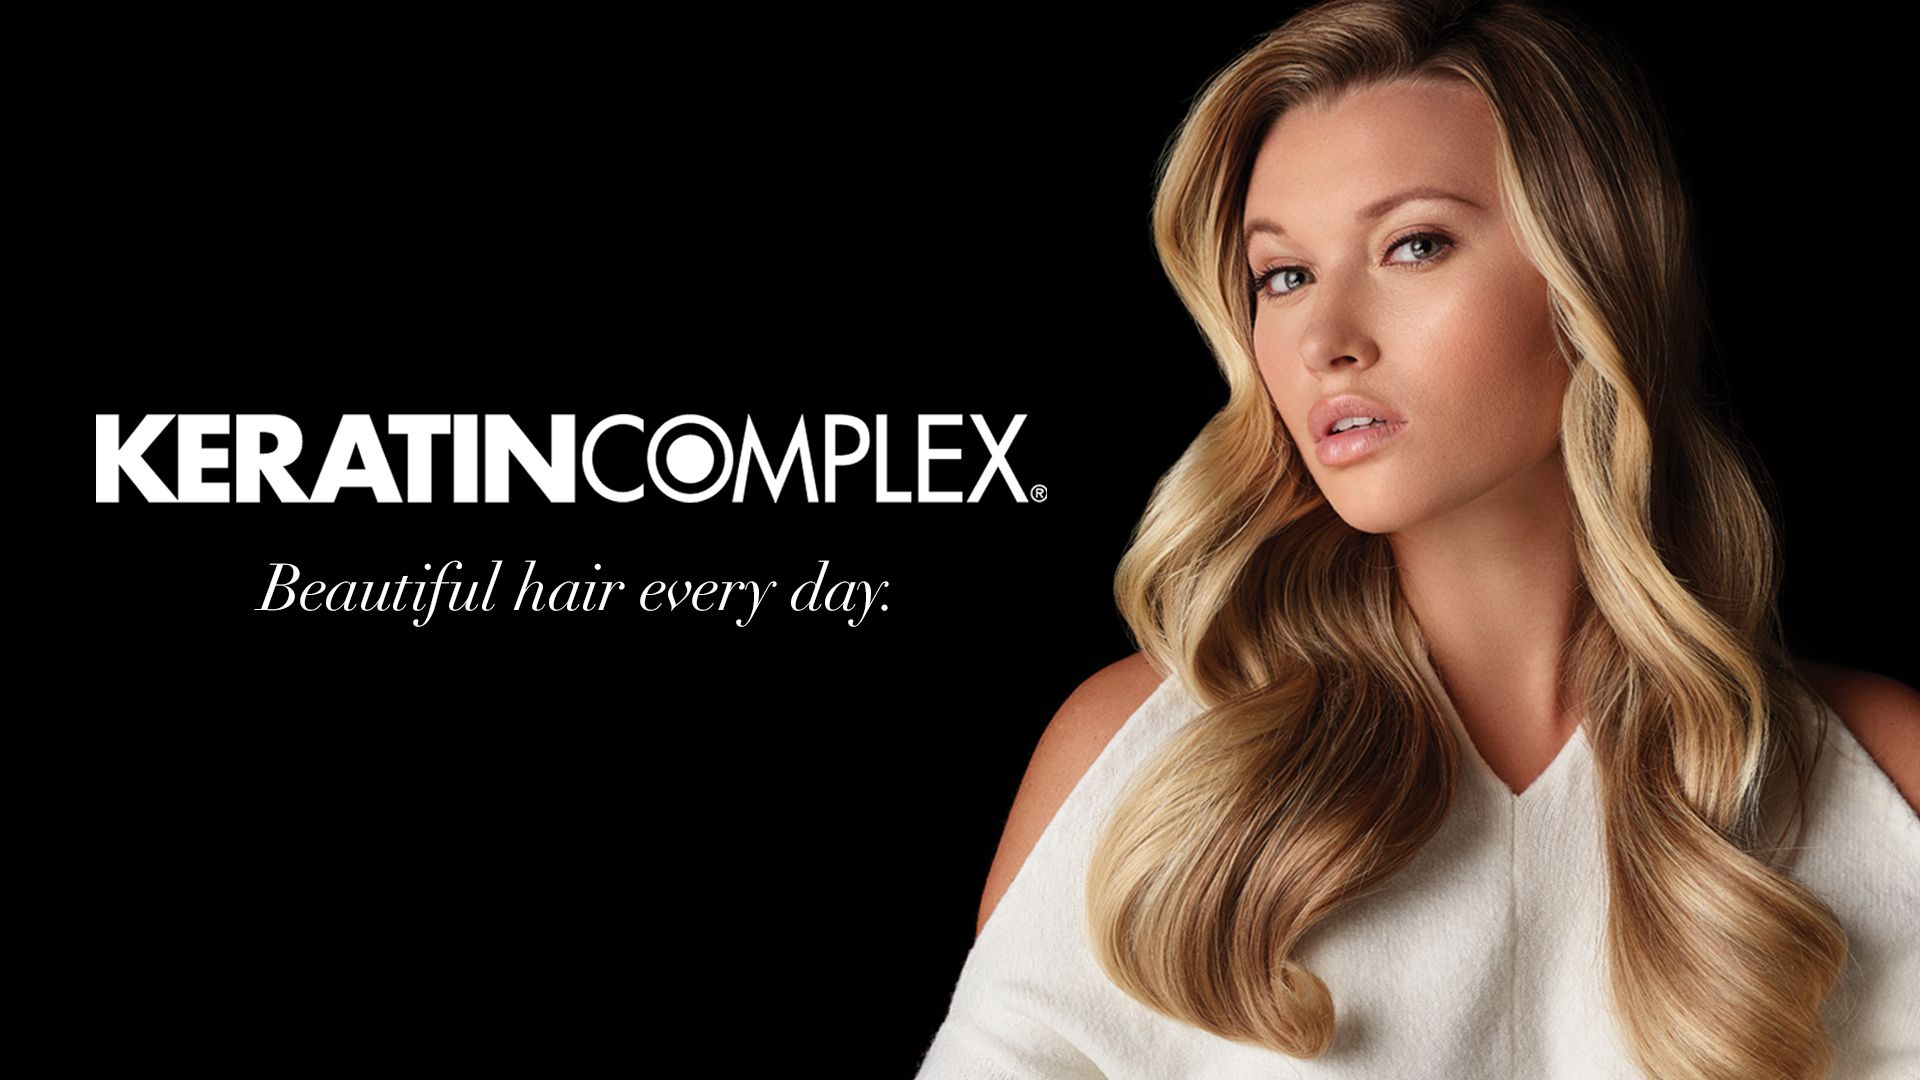 Keratin Complex Beautiful hair every day: